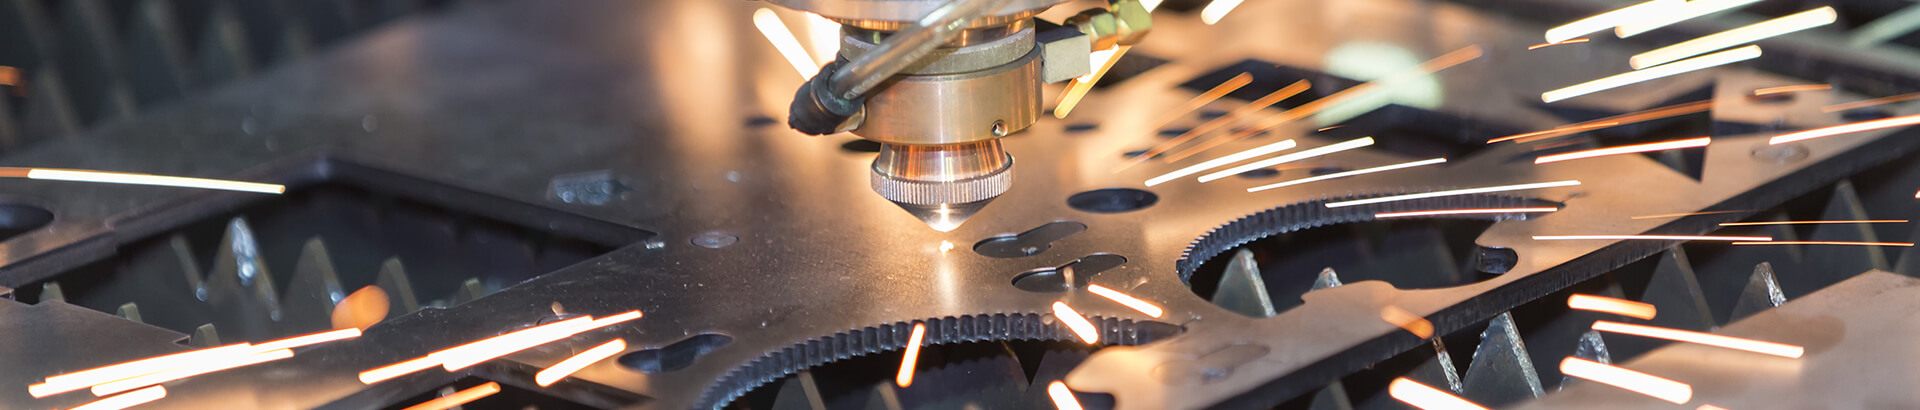 What Does Laser Cutting Entail?